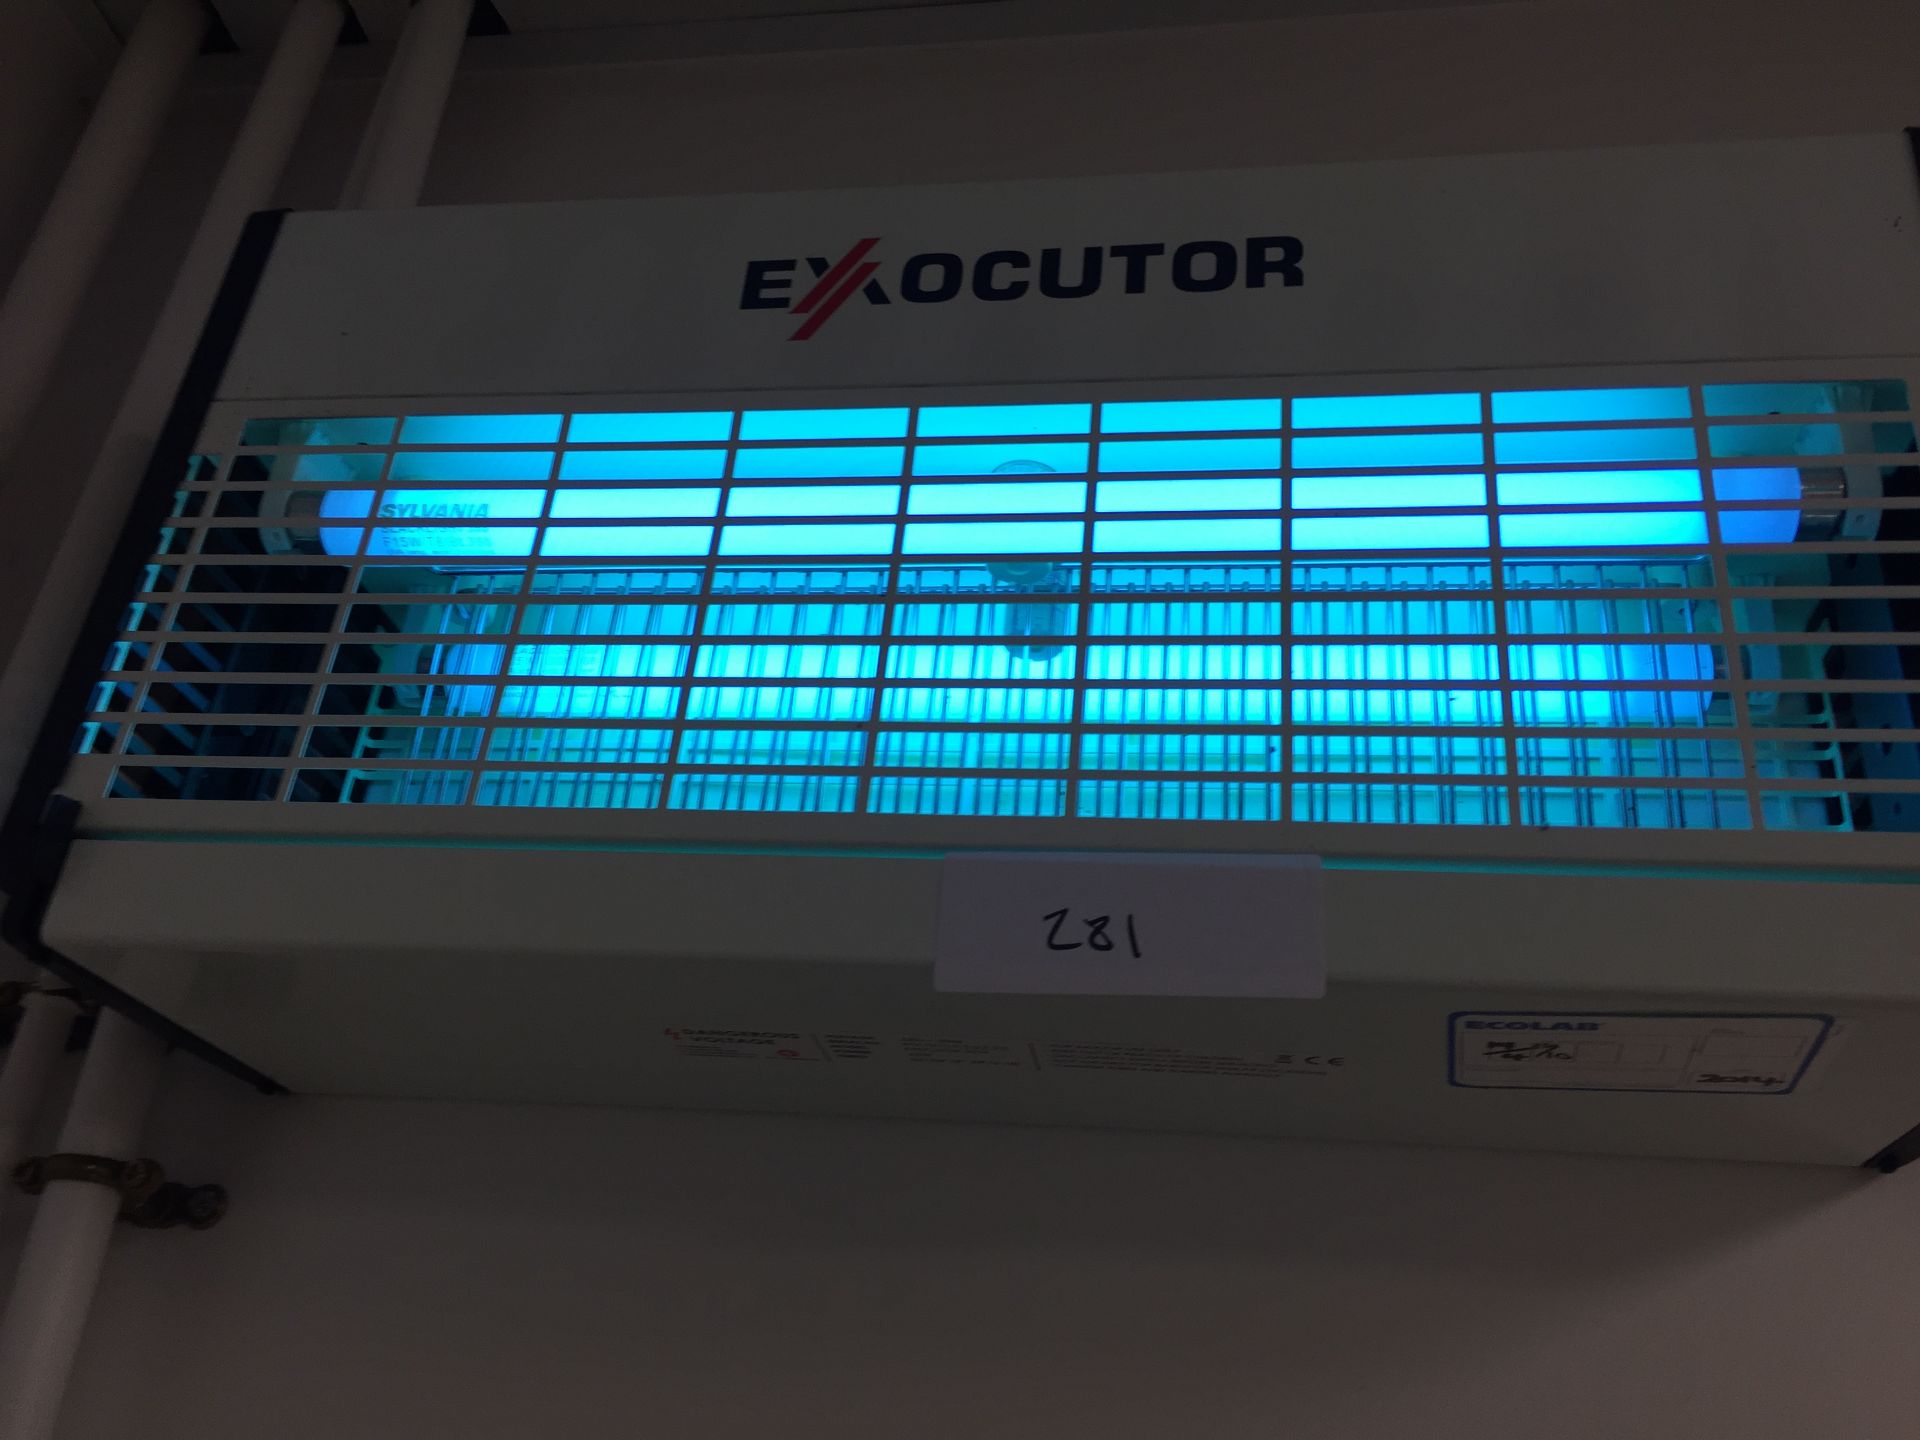 1 x Exocutor 30w Electric Fly Killer - 240v - Current Model - Professional Fly Killer for Catering - Image 3 of 3